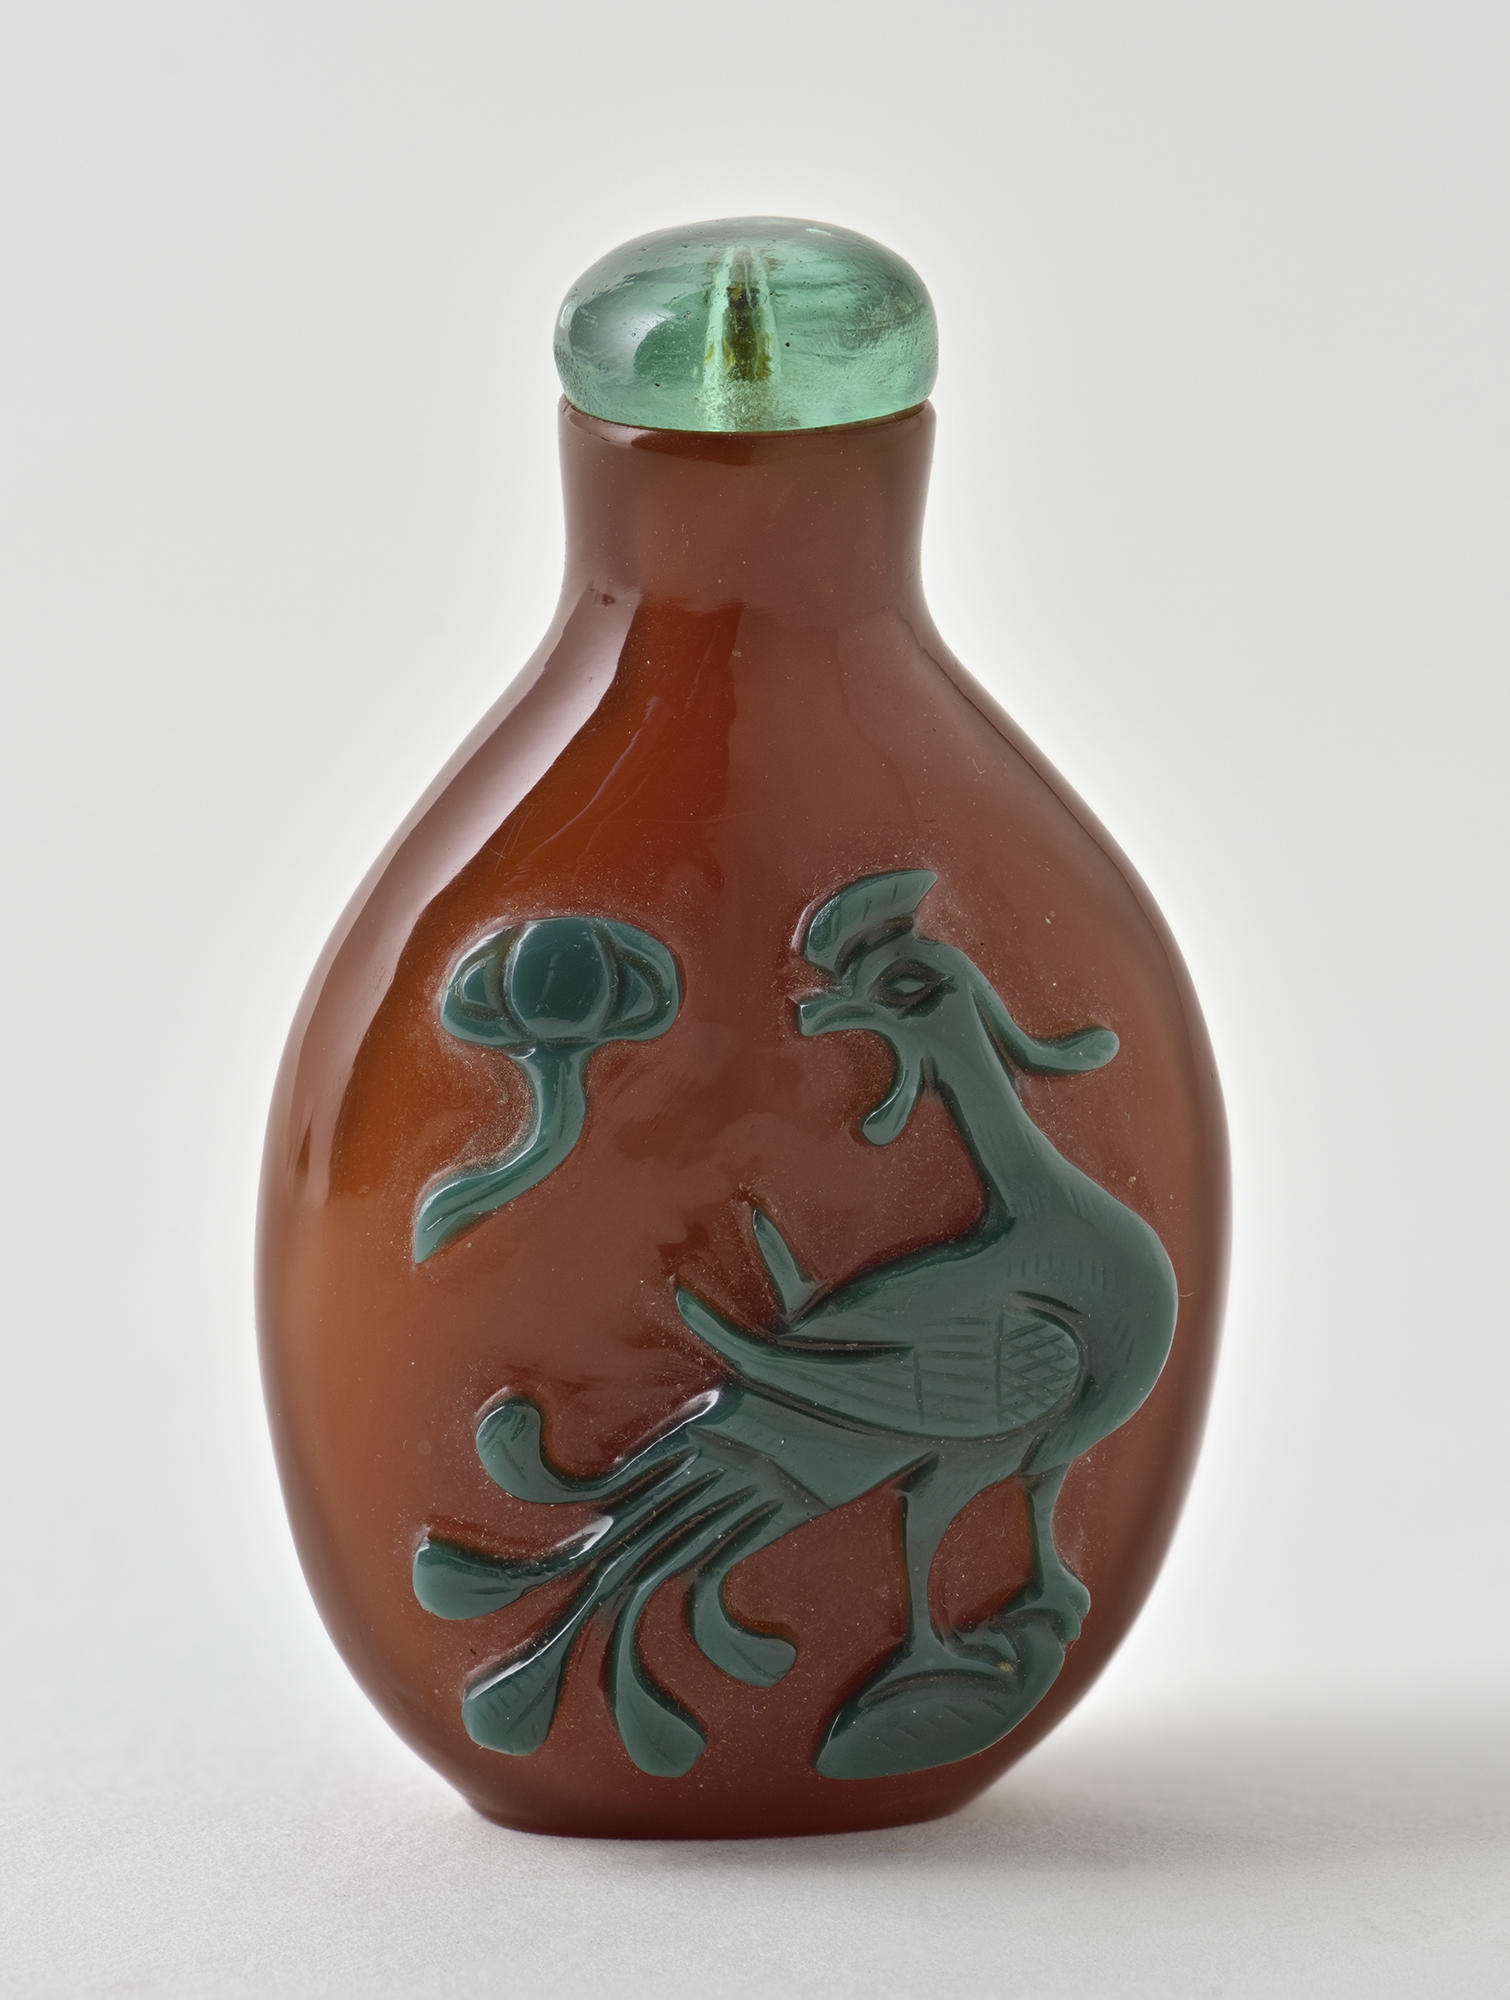  A red glass oval-shaped snuff bottle with a blue-green glass topper. There is a phoenix and sun and cloud motif in dark green cut glass.